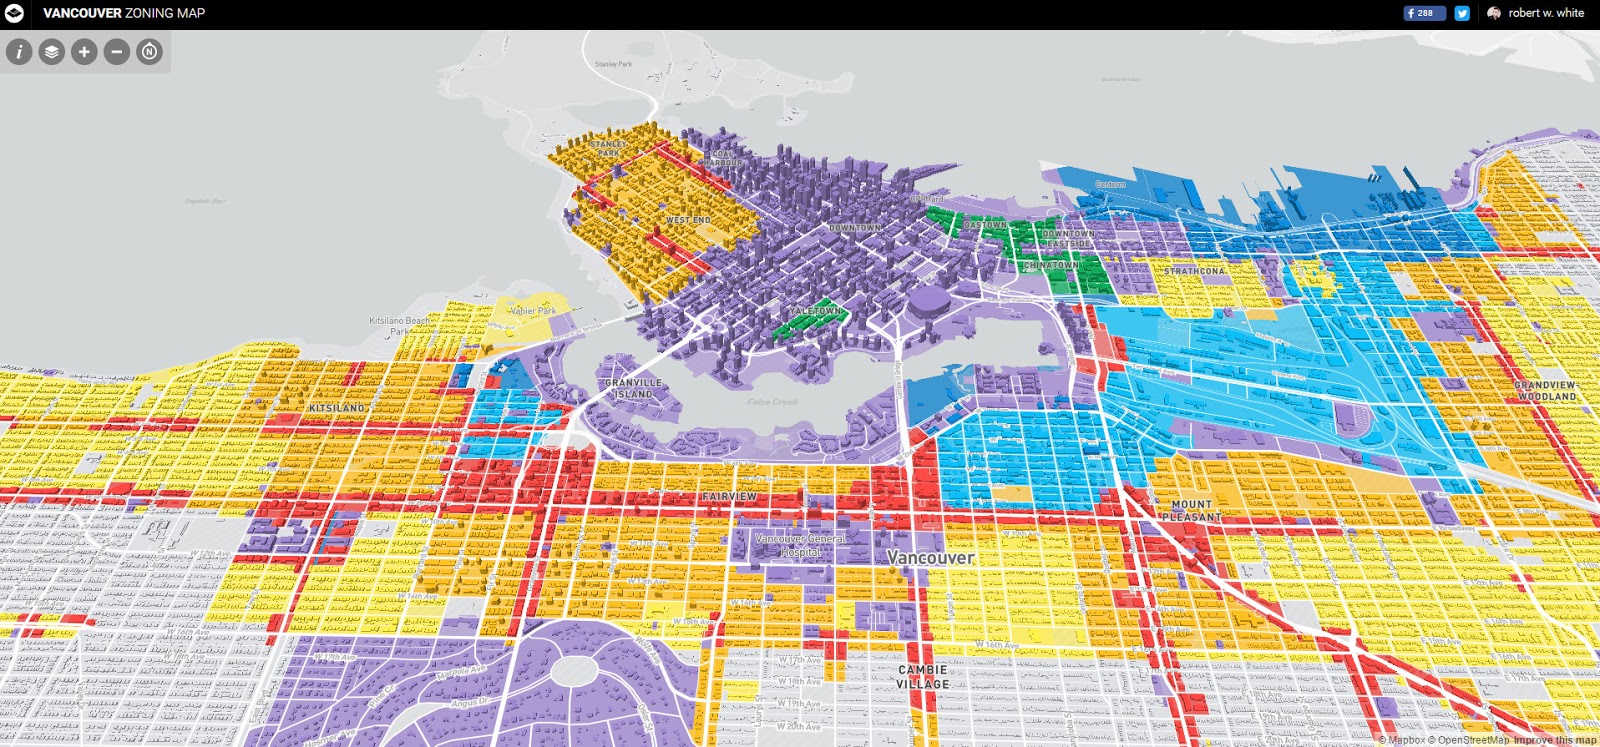 Vancouver zoning map - Vivid Maps